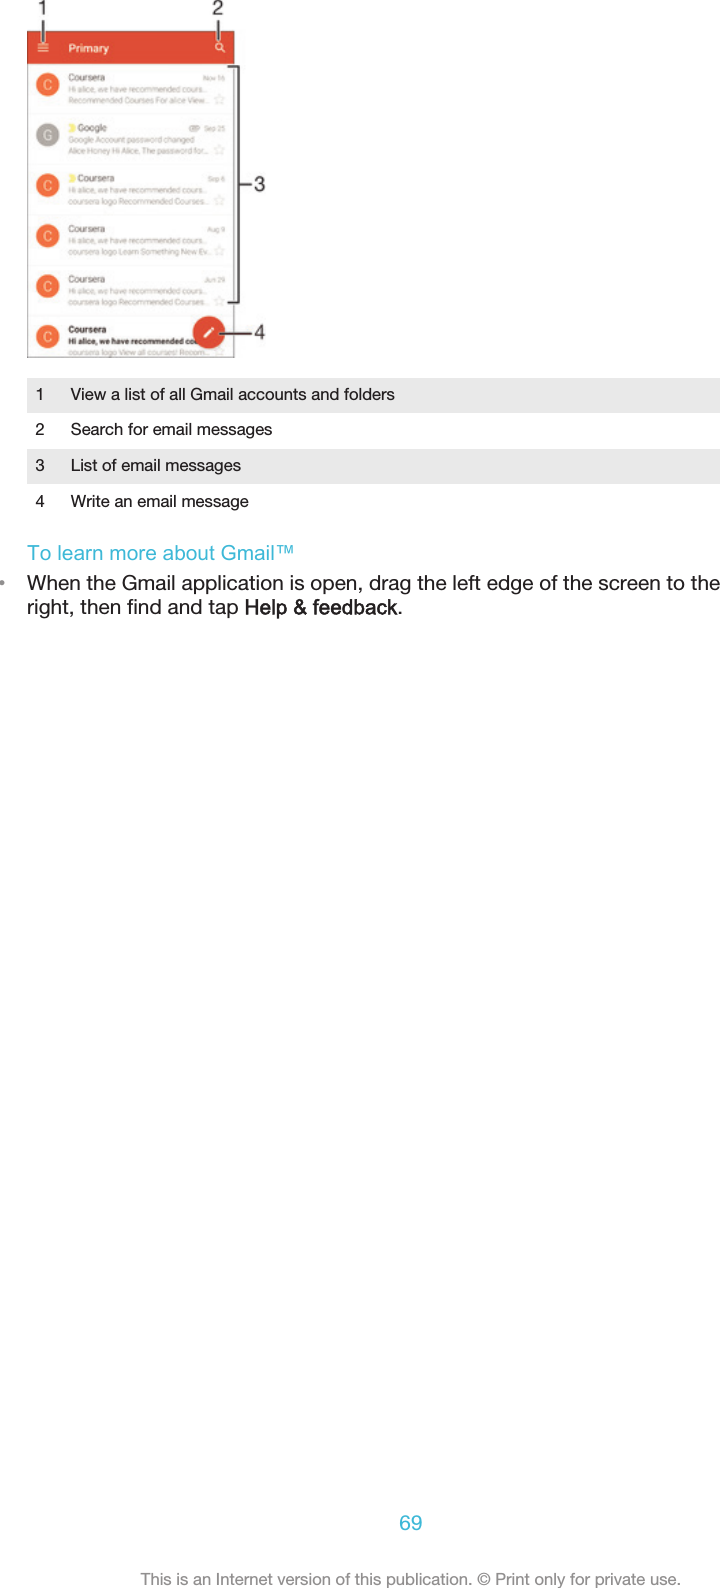 1 View a list of all Gmail accounts and folders2 Search for email messages3 List of email messages4 Write an email messageTo learn more about Gmail™•When the Gmail application is open, drag the left edge of the screen to theright, then find and tap Help &amp; feedback.69This is an Internet version of this publication. © Print only for private use.